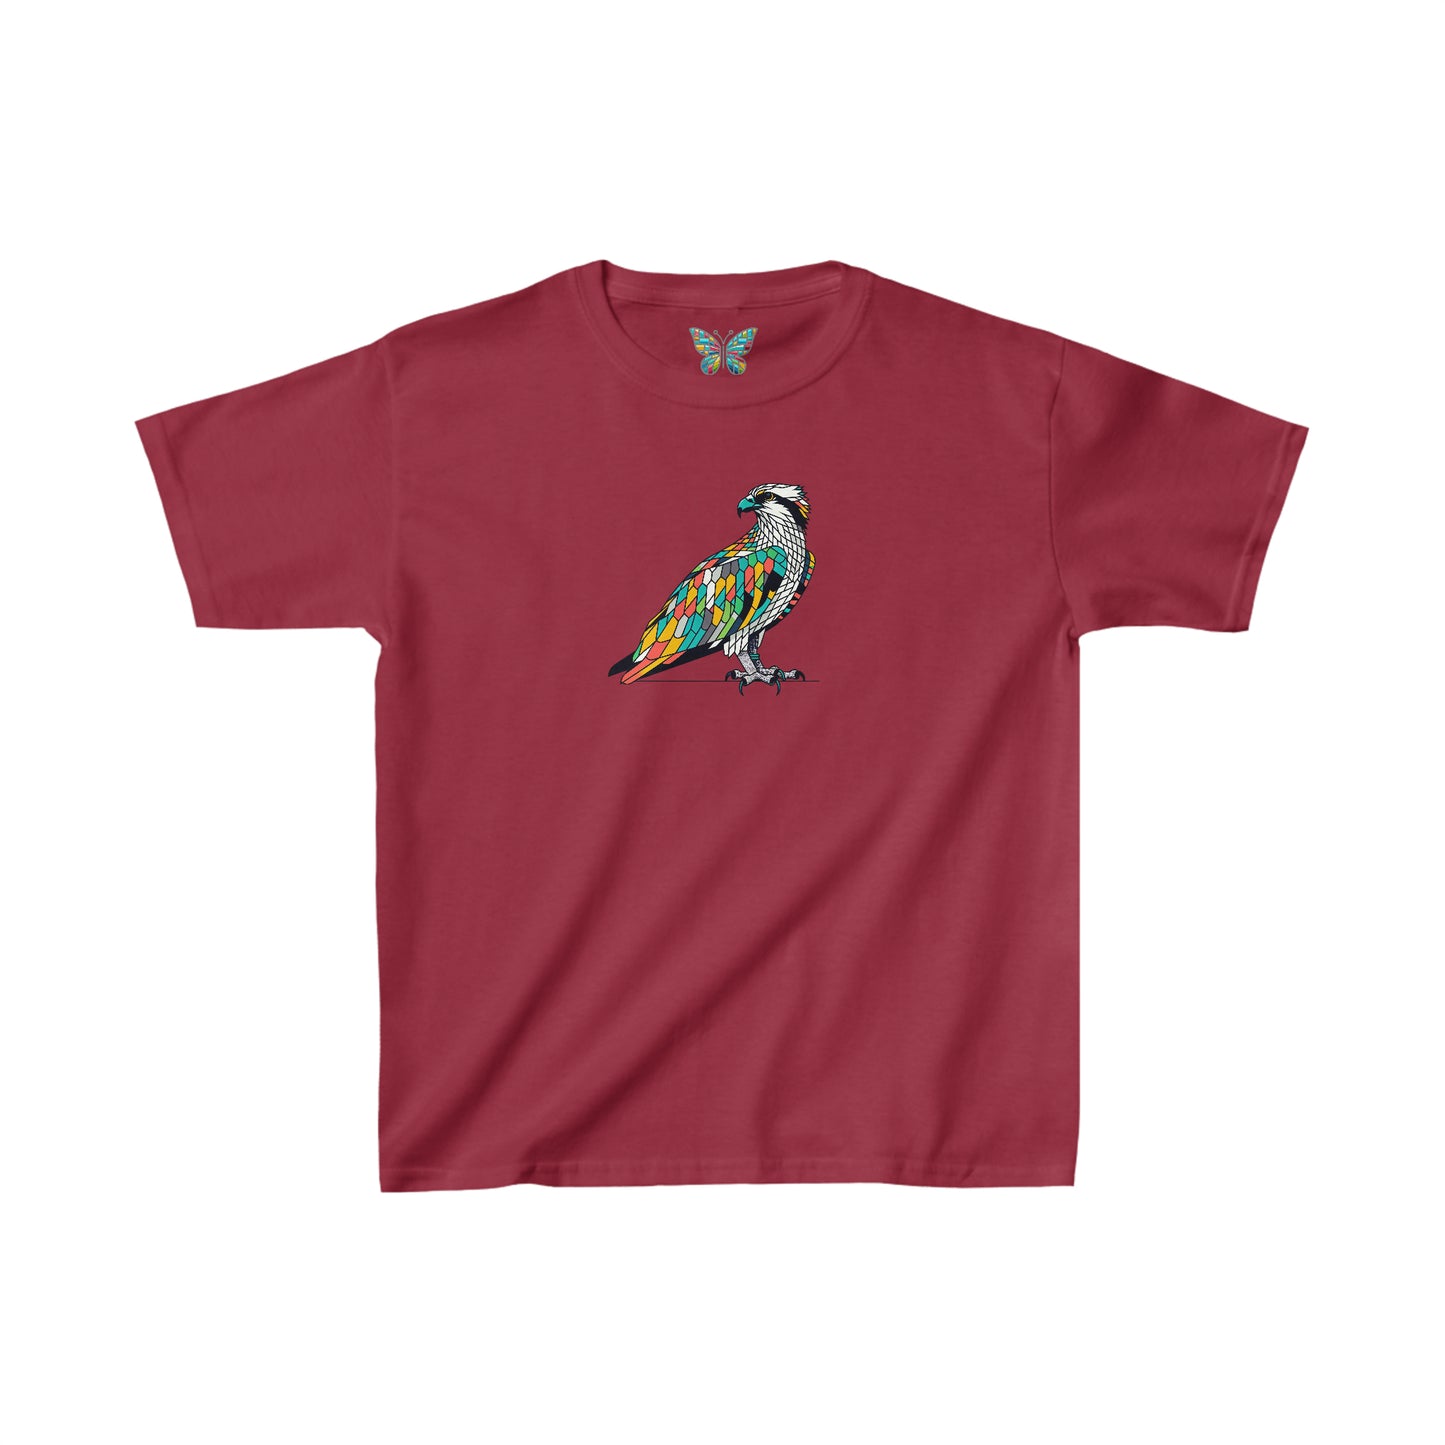 Osprey Quillabrate - Youth - Snazzle Tee